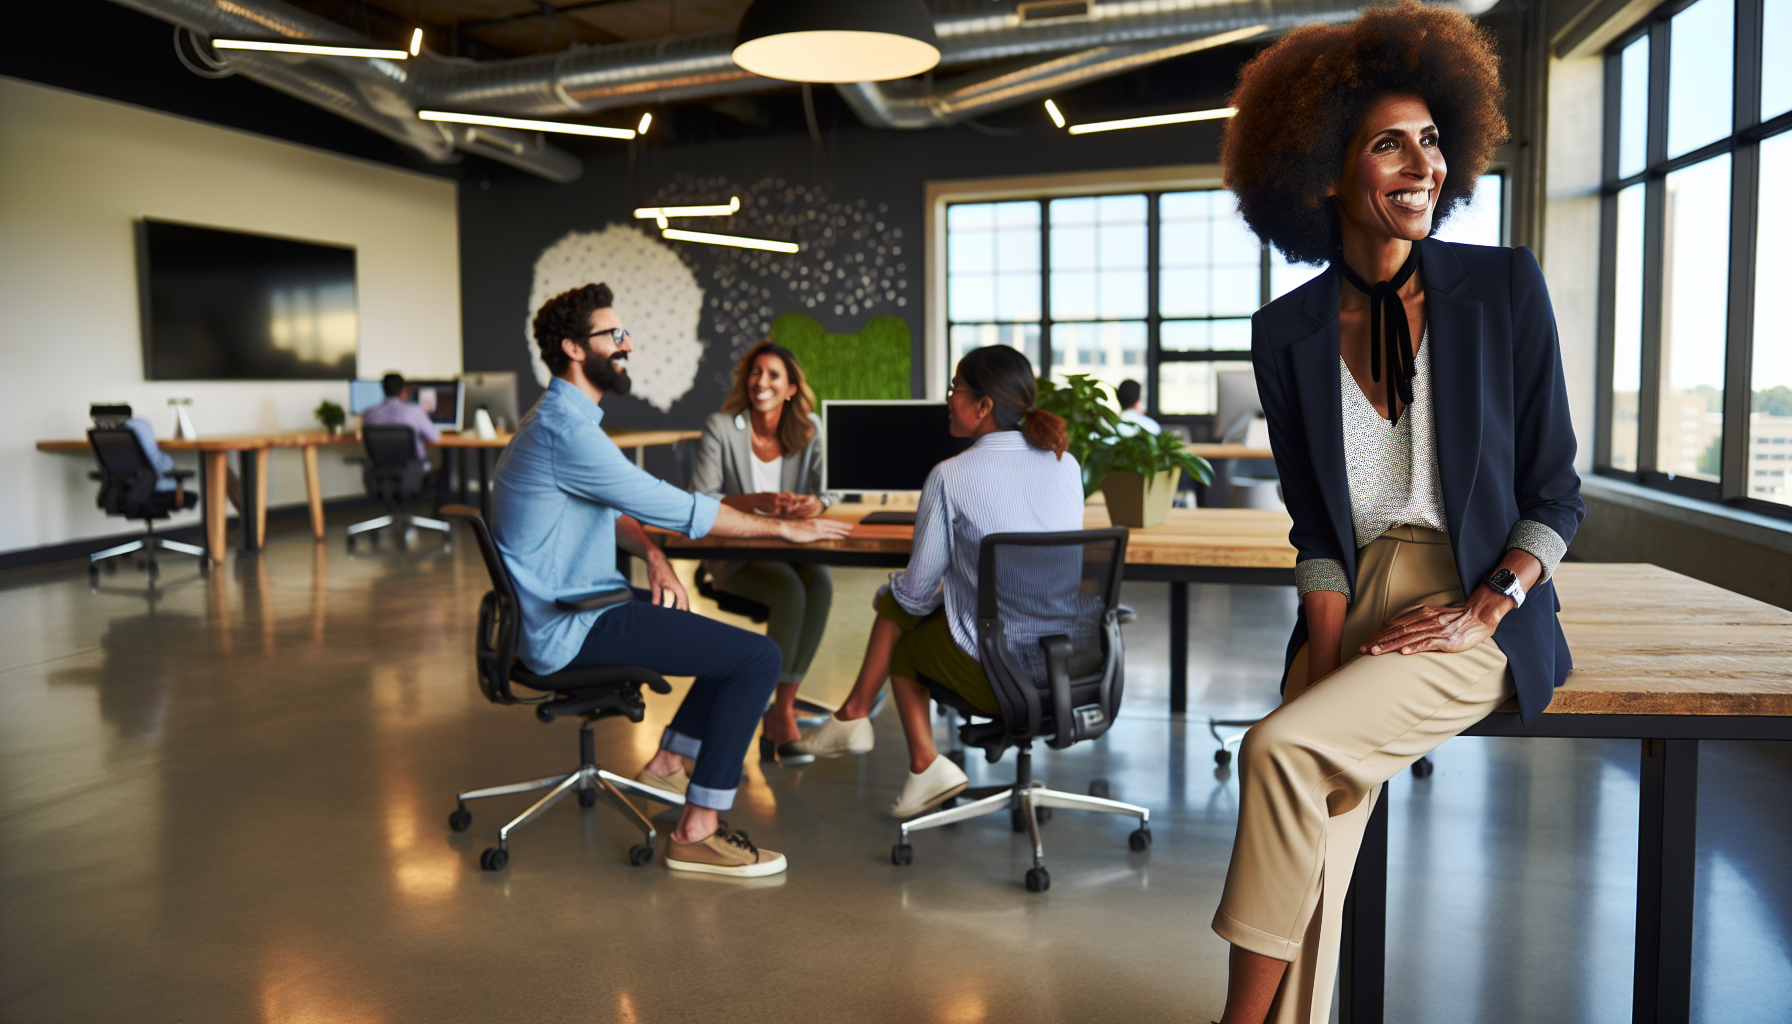 Employees in a modern office environment with vibrant company culture